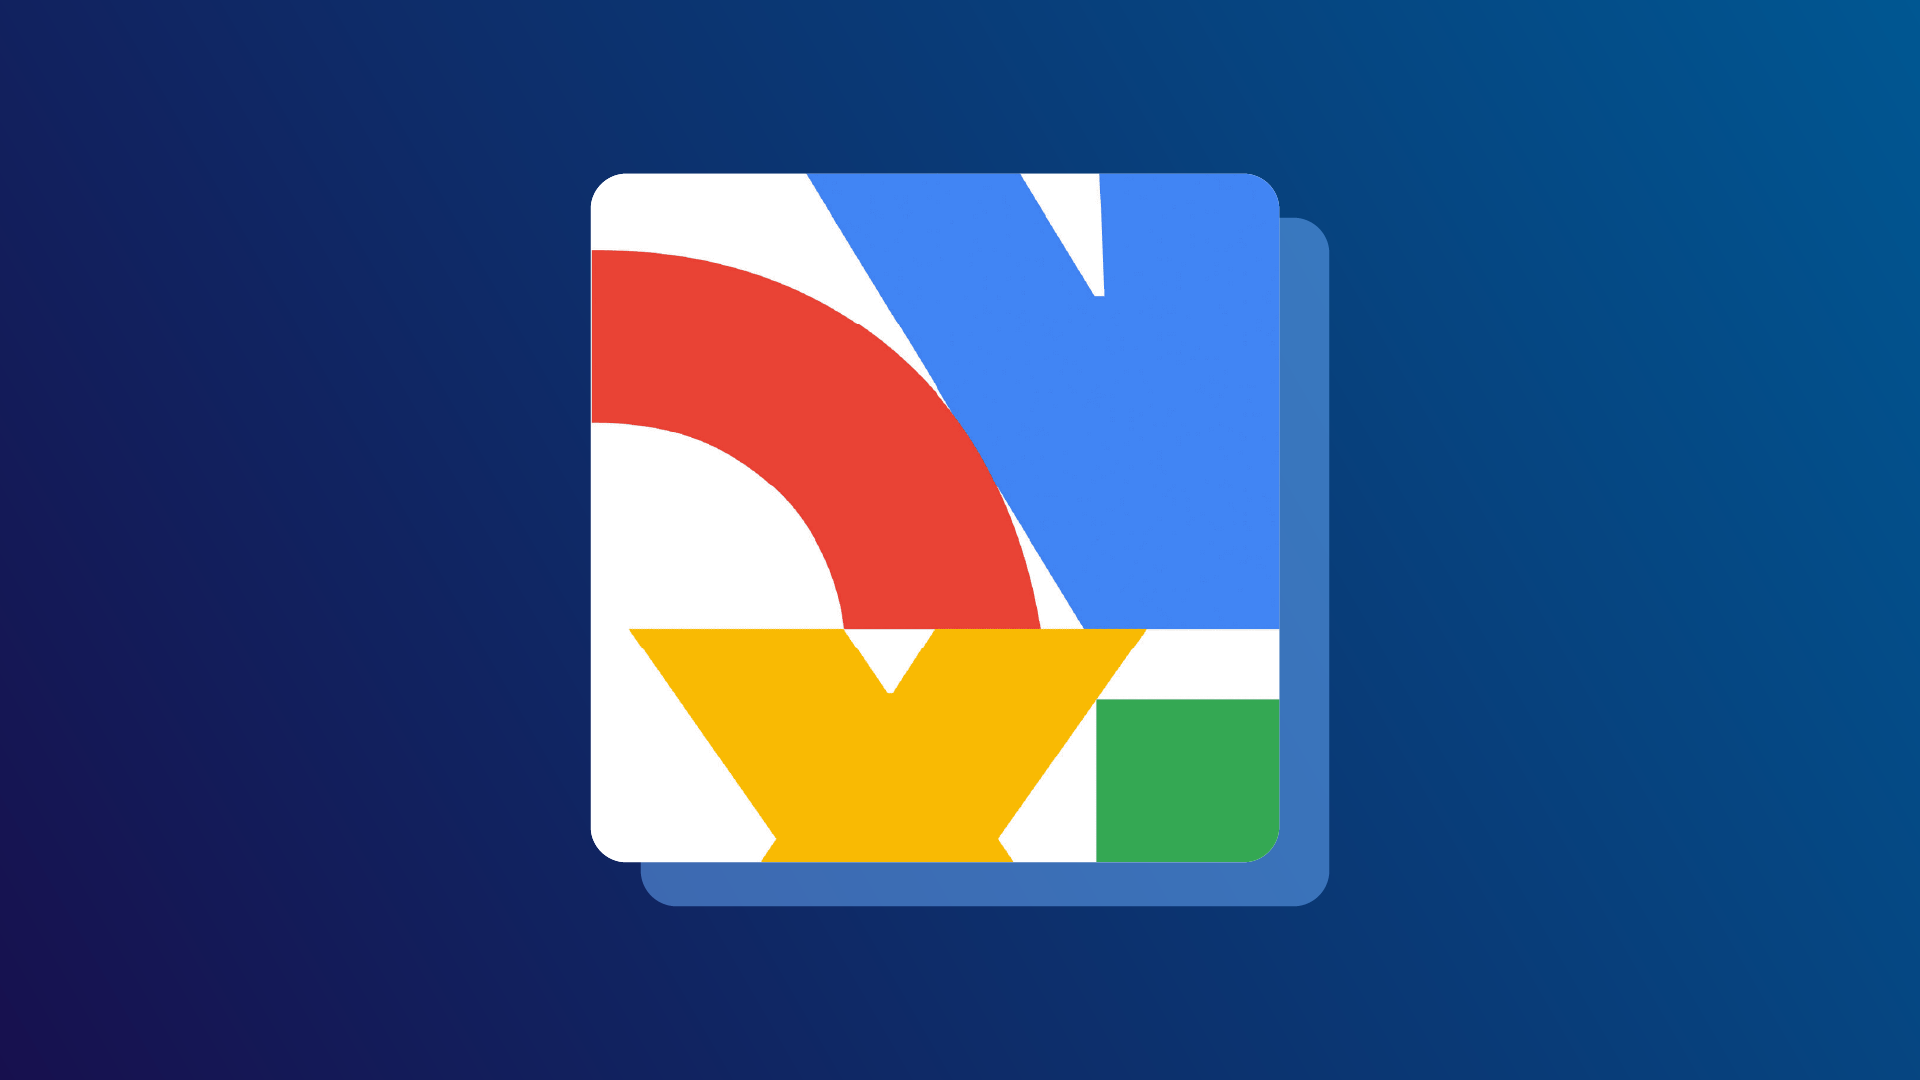 A colorful logo in a square shape with green, red, yellow, and blue colors